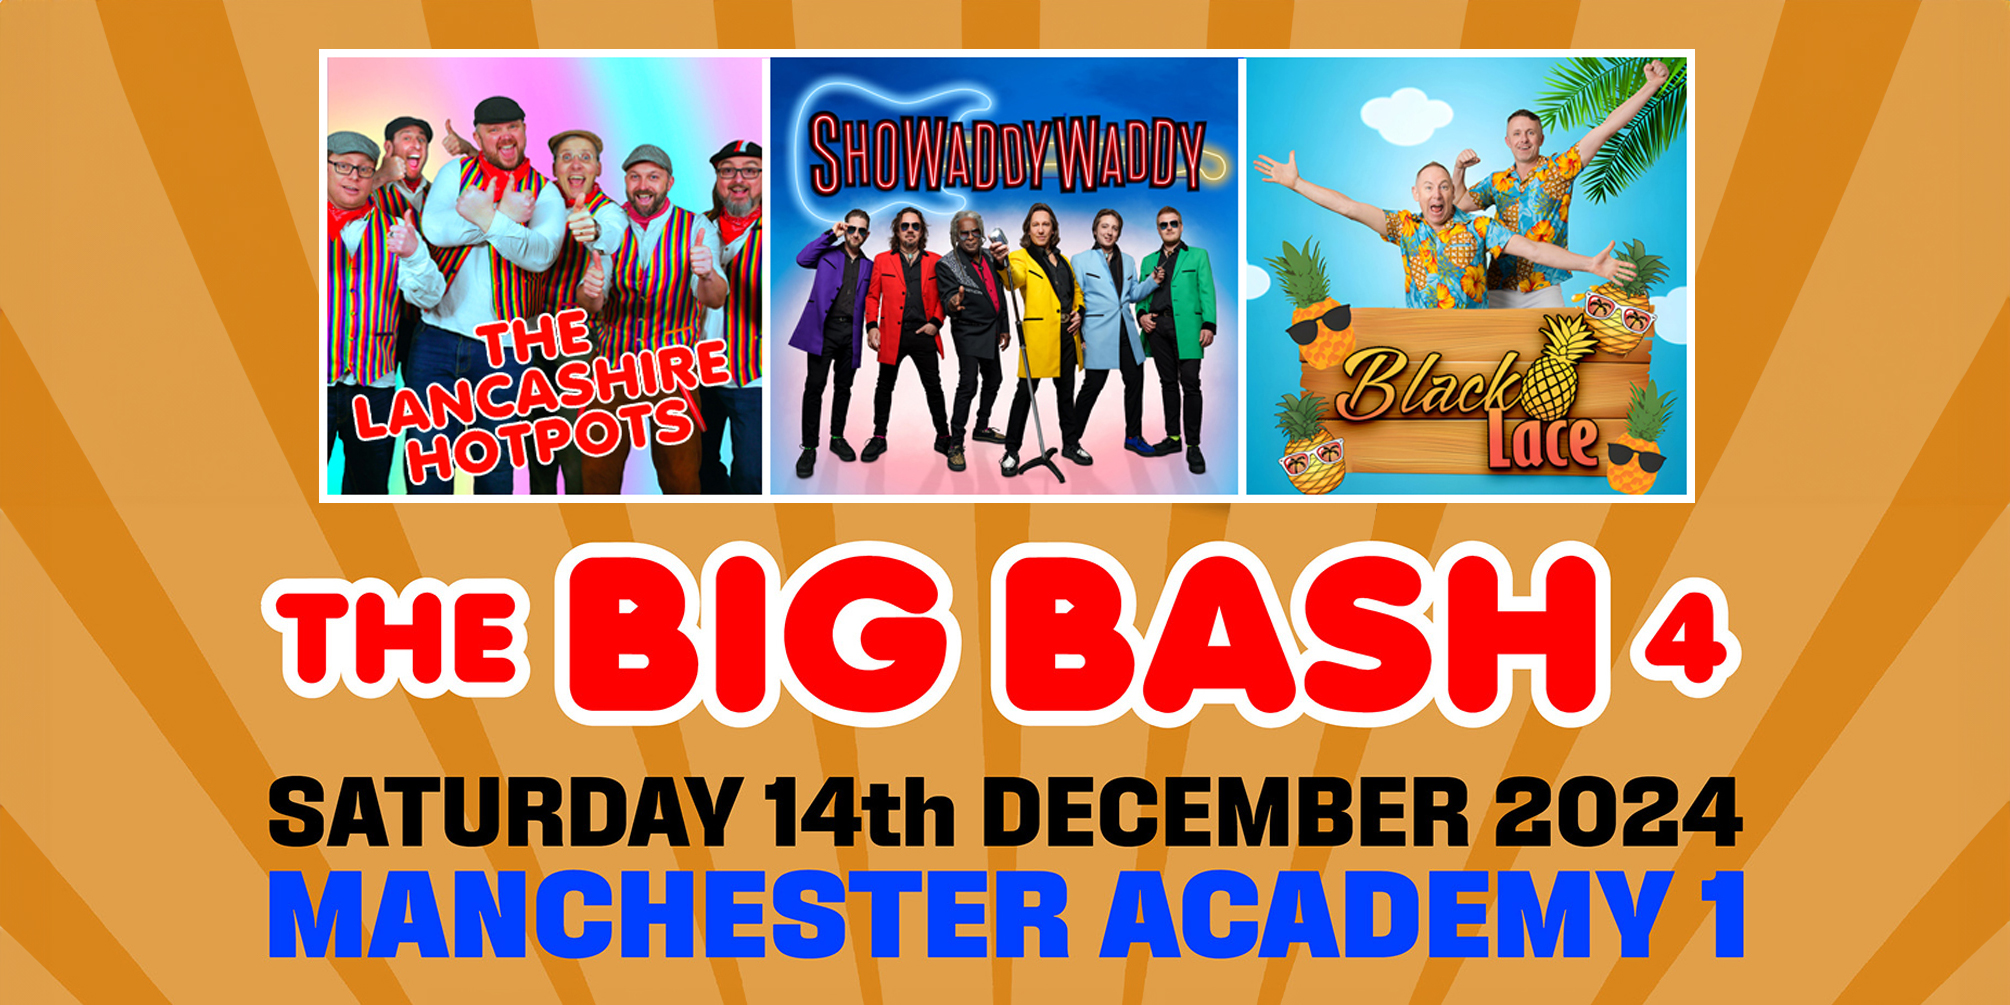 Big Bash 4 promotional image featuring The Lancashire Hotpots, Showaddywaddy and Black Lace